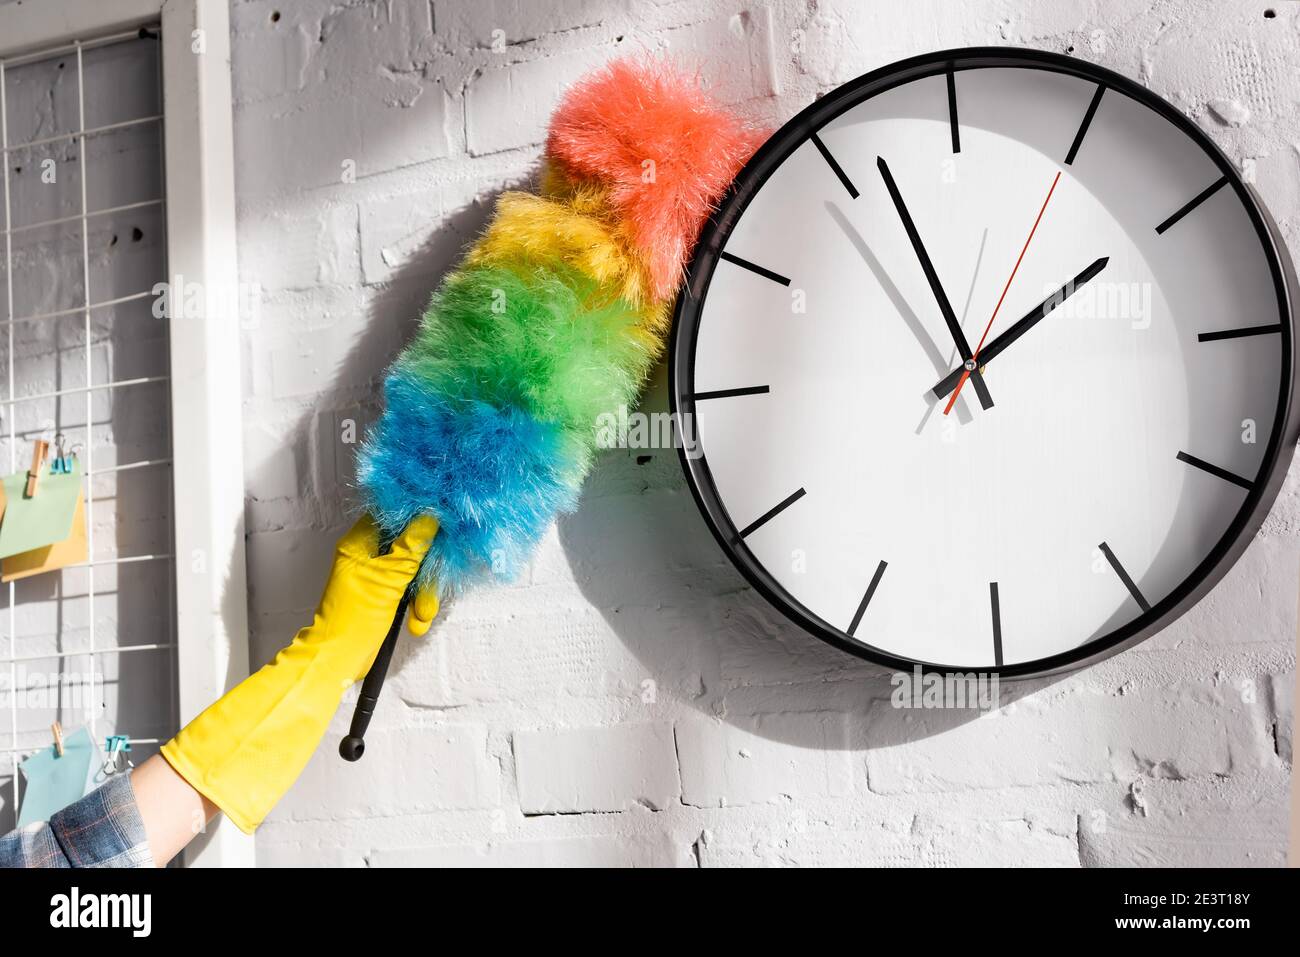 Cropped view of woman cleaning clock with dust brush Stock Photo